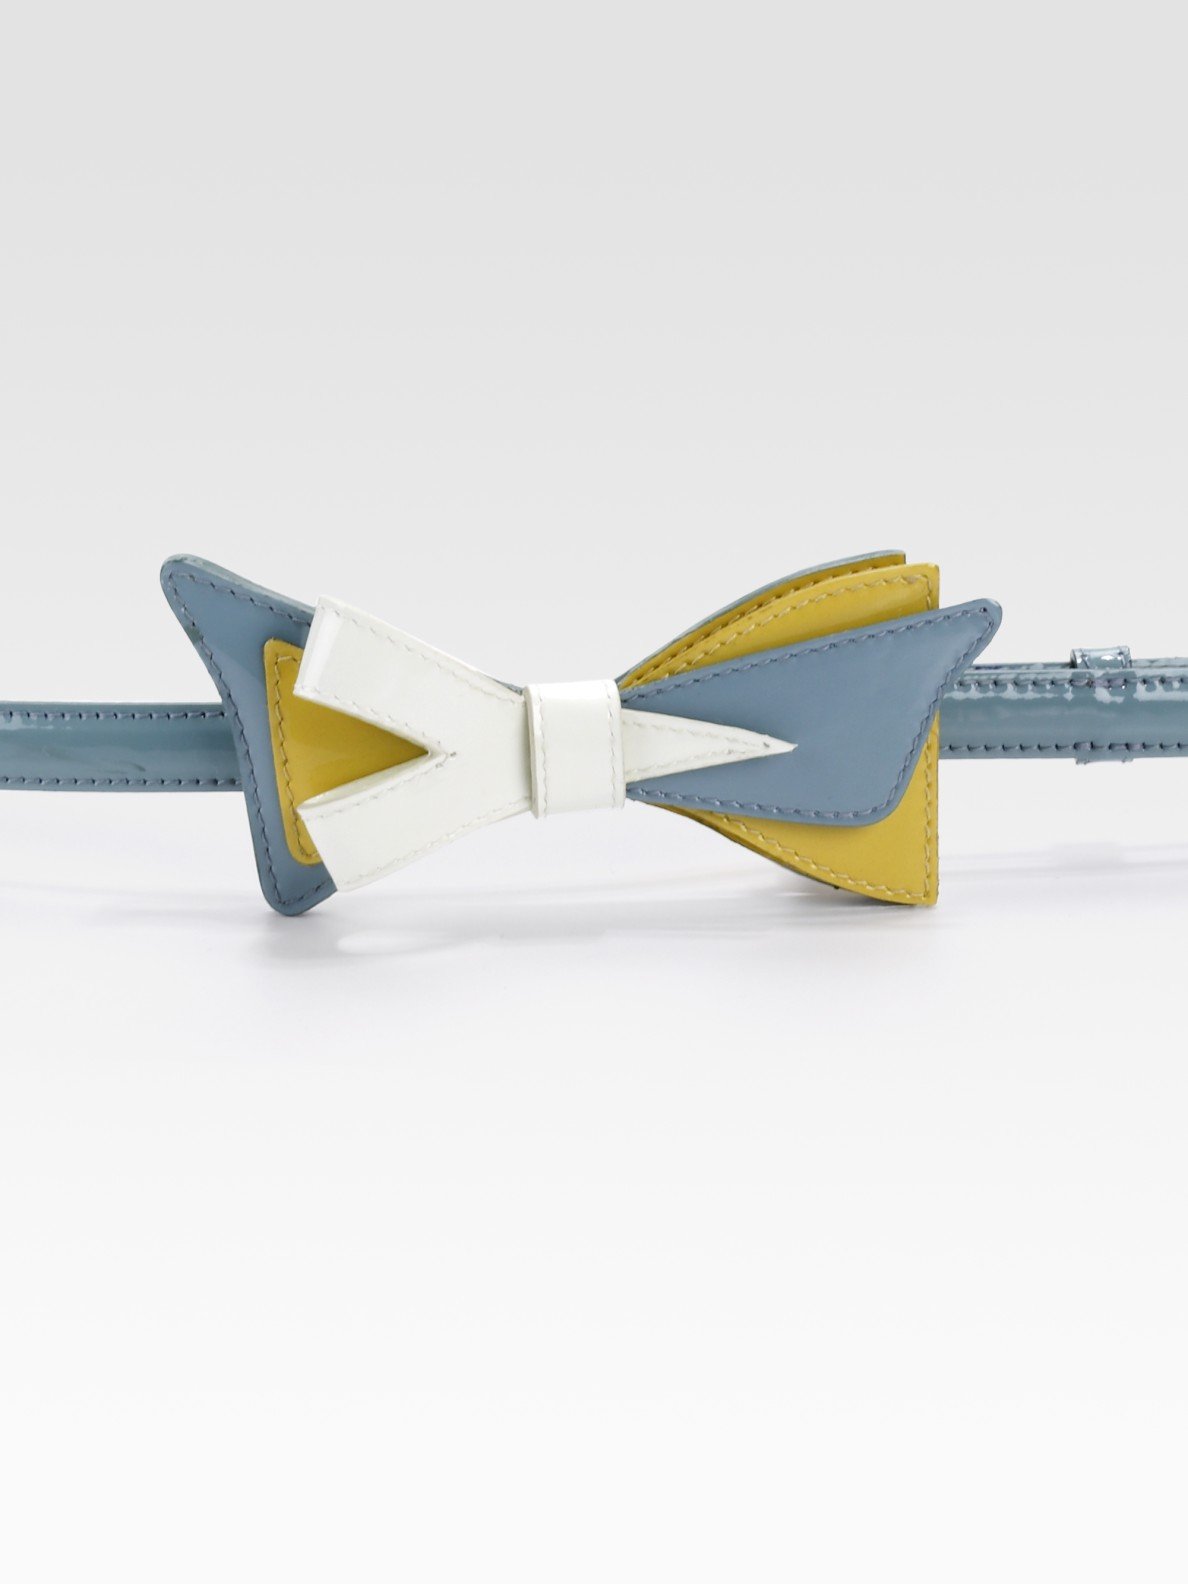 Prada Tri-colored Patent Leather Bow Belt in Blue (orchidea) | Lyst  